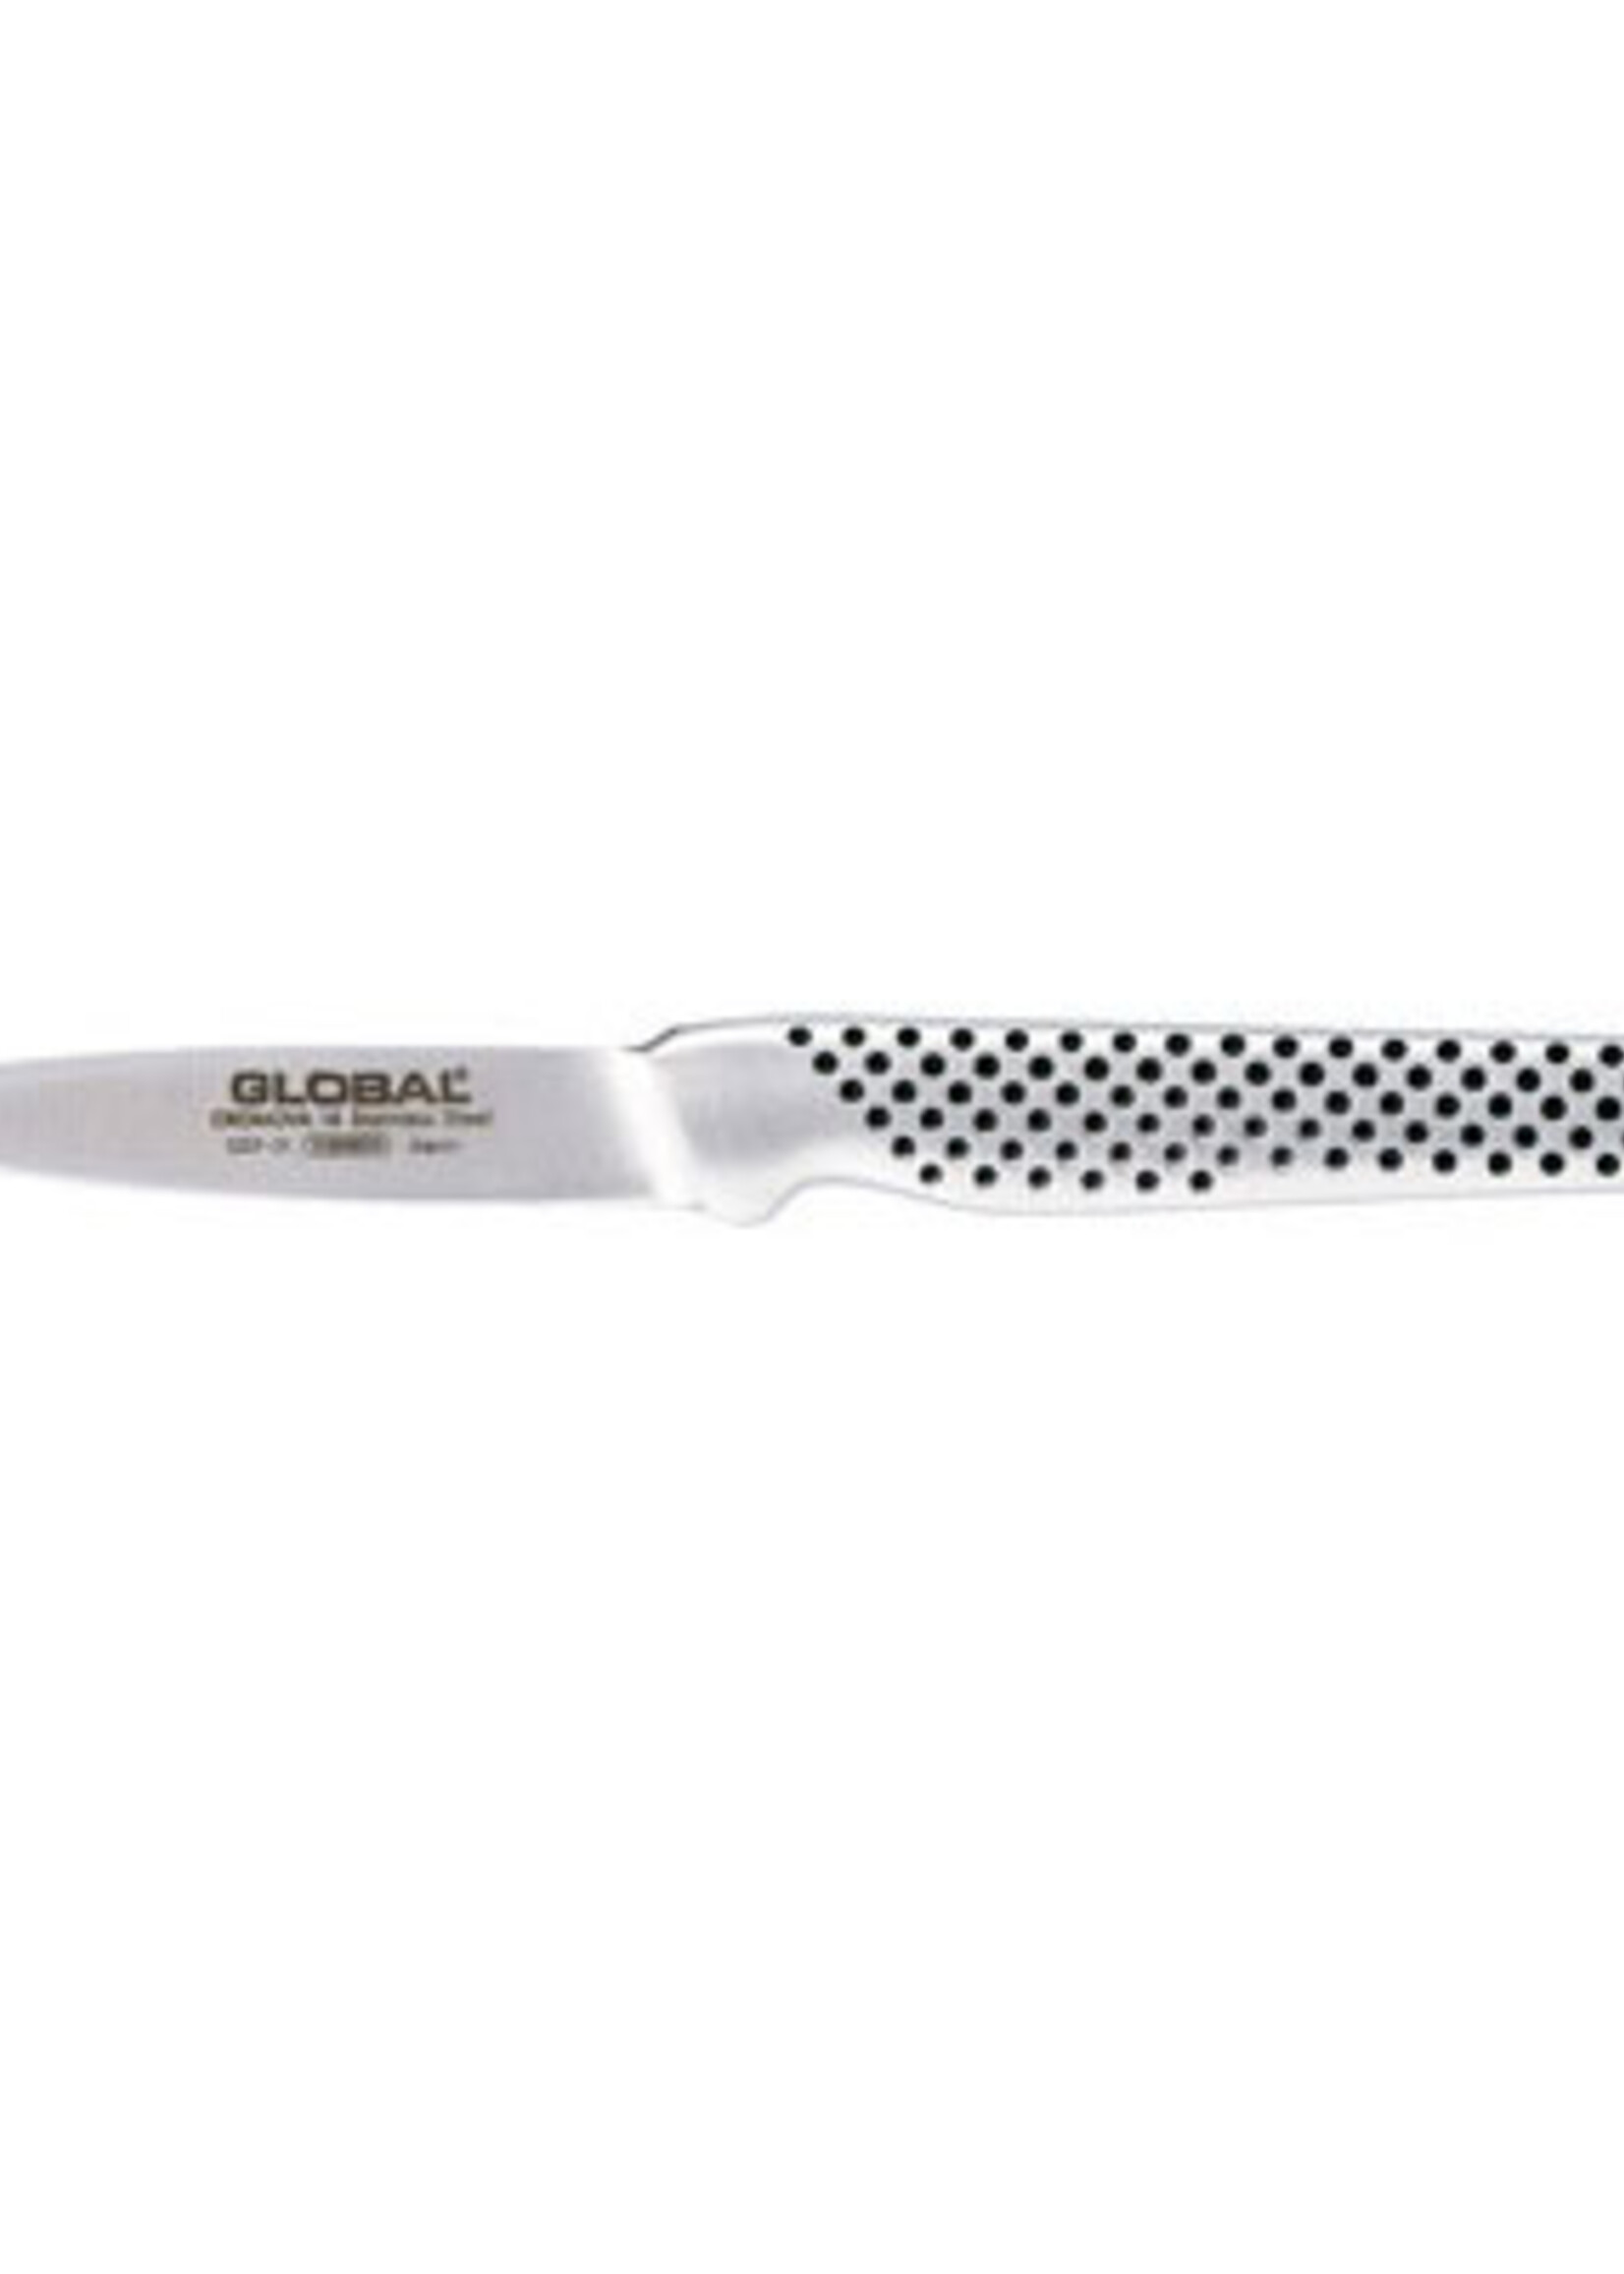 GLOBAL Global - GSF31 - couteau d'office - 8cm - grand manche